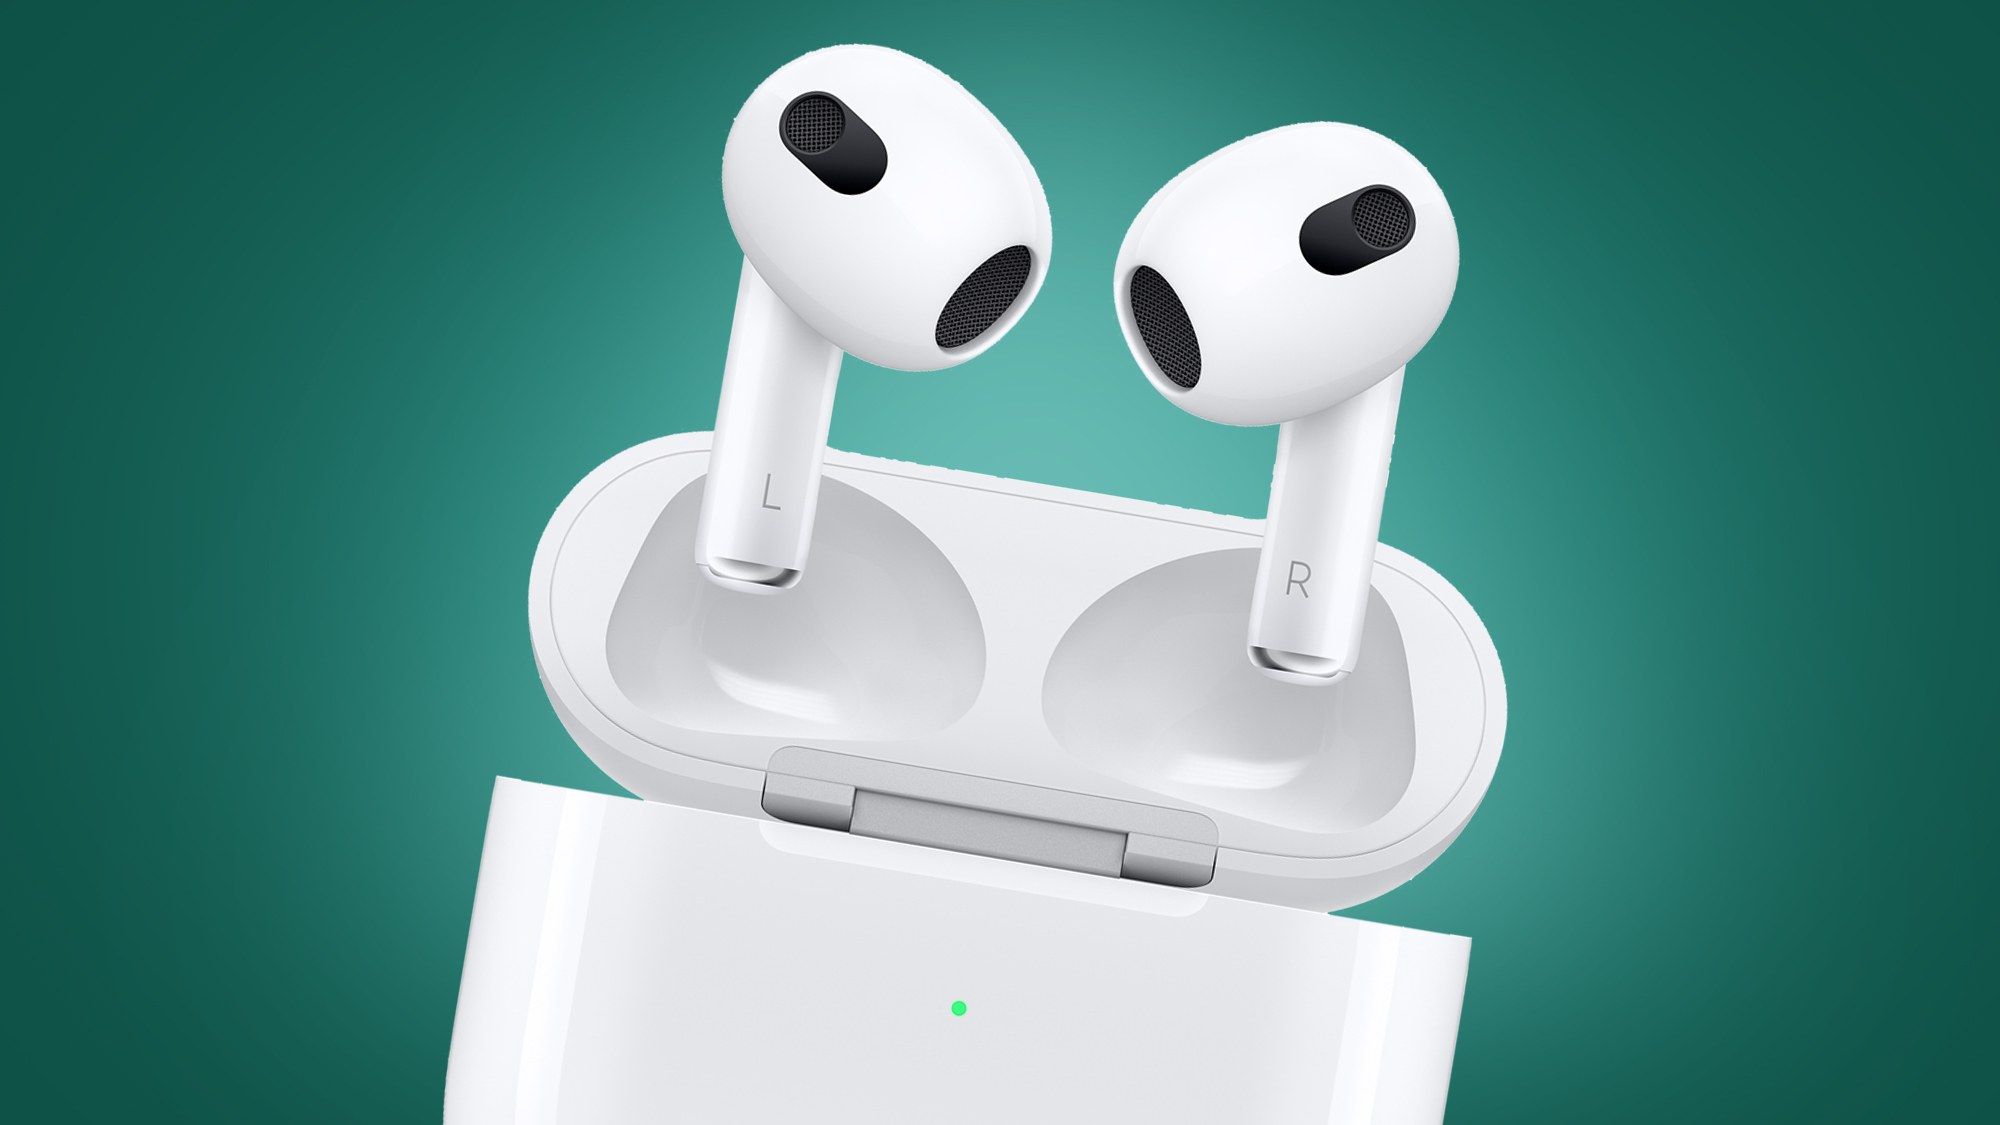 The Apple Airpods 3rd generation